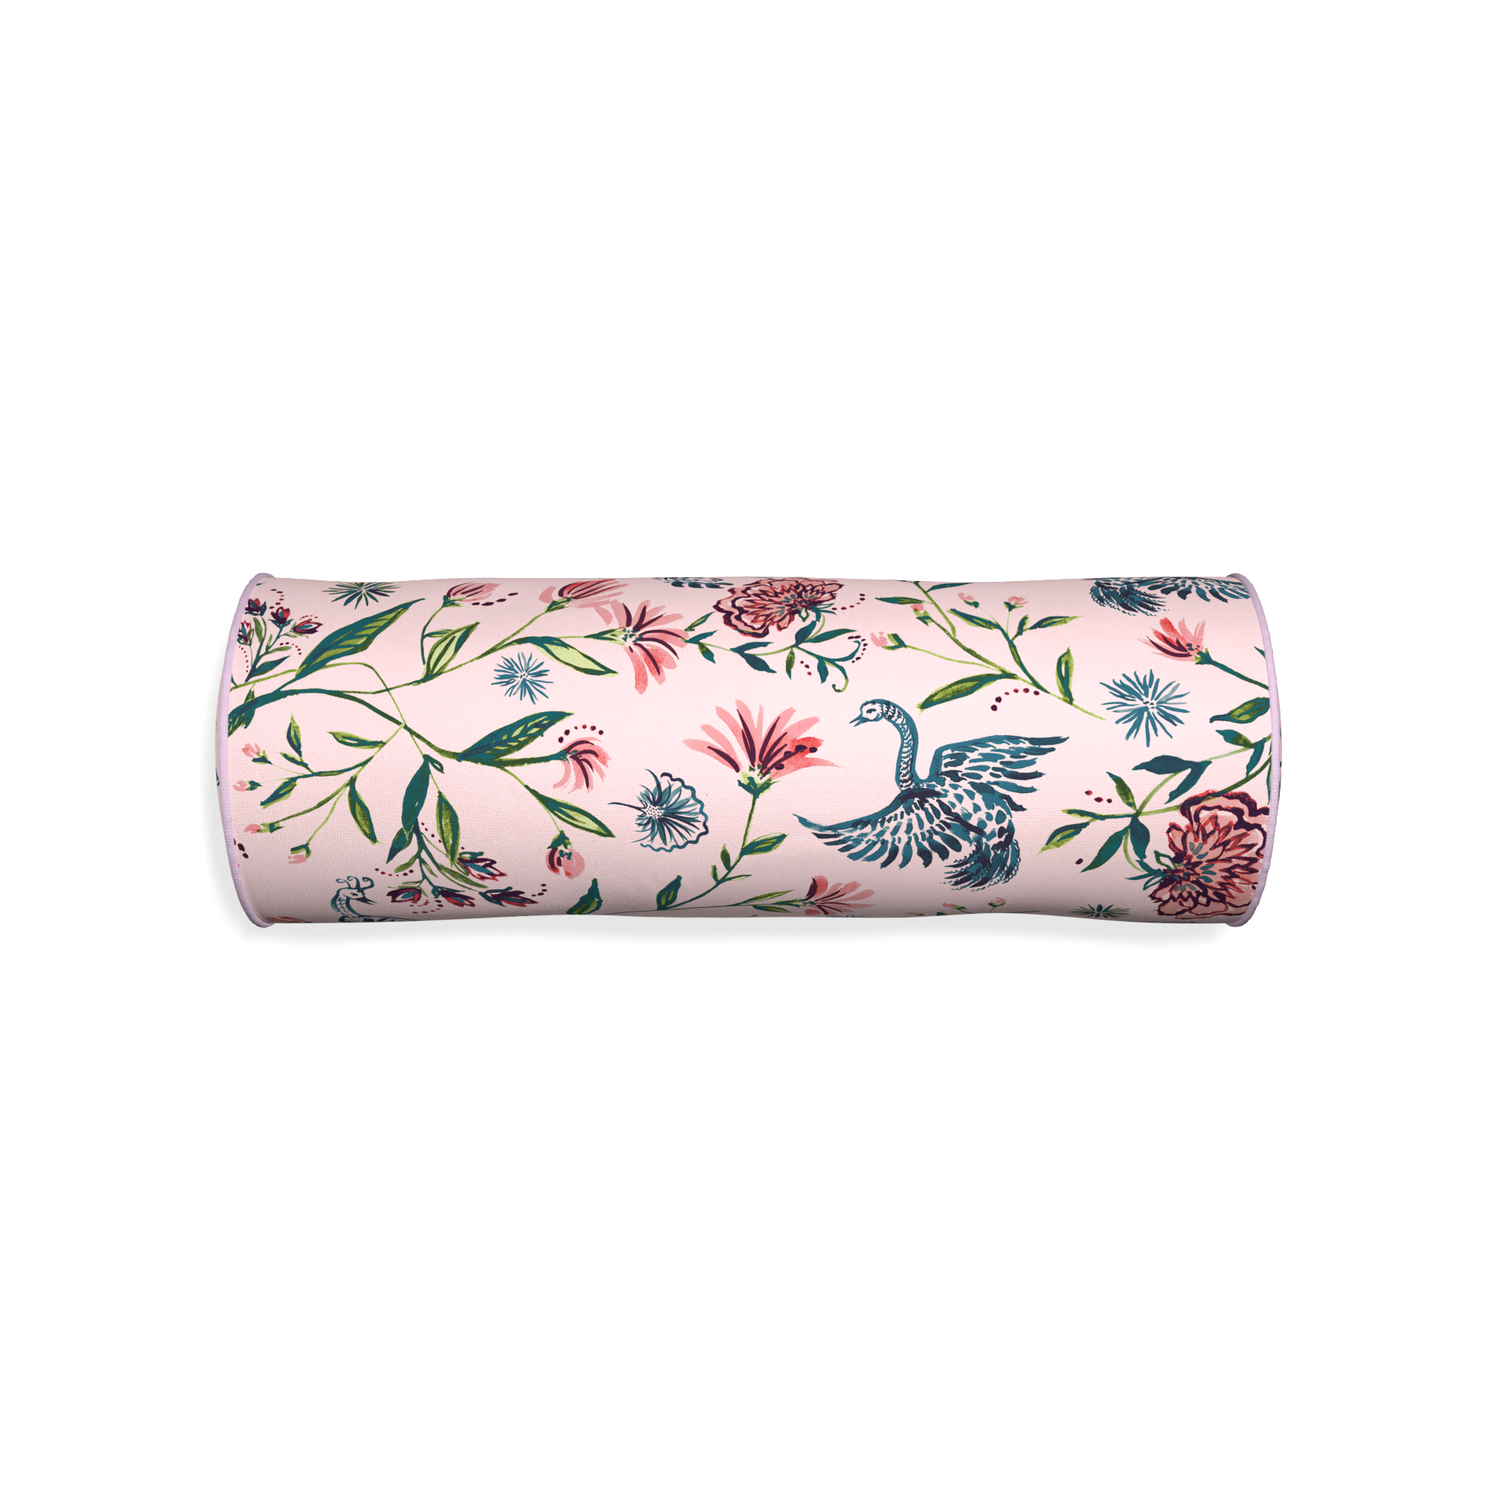 Bolster daphne rose custom rose chinoiseriepillow with l piping on white background